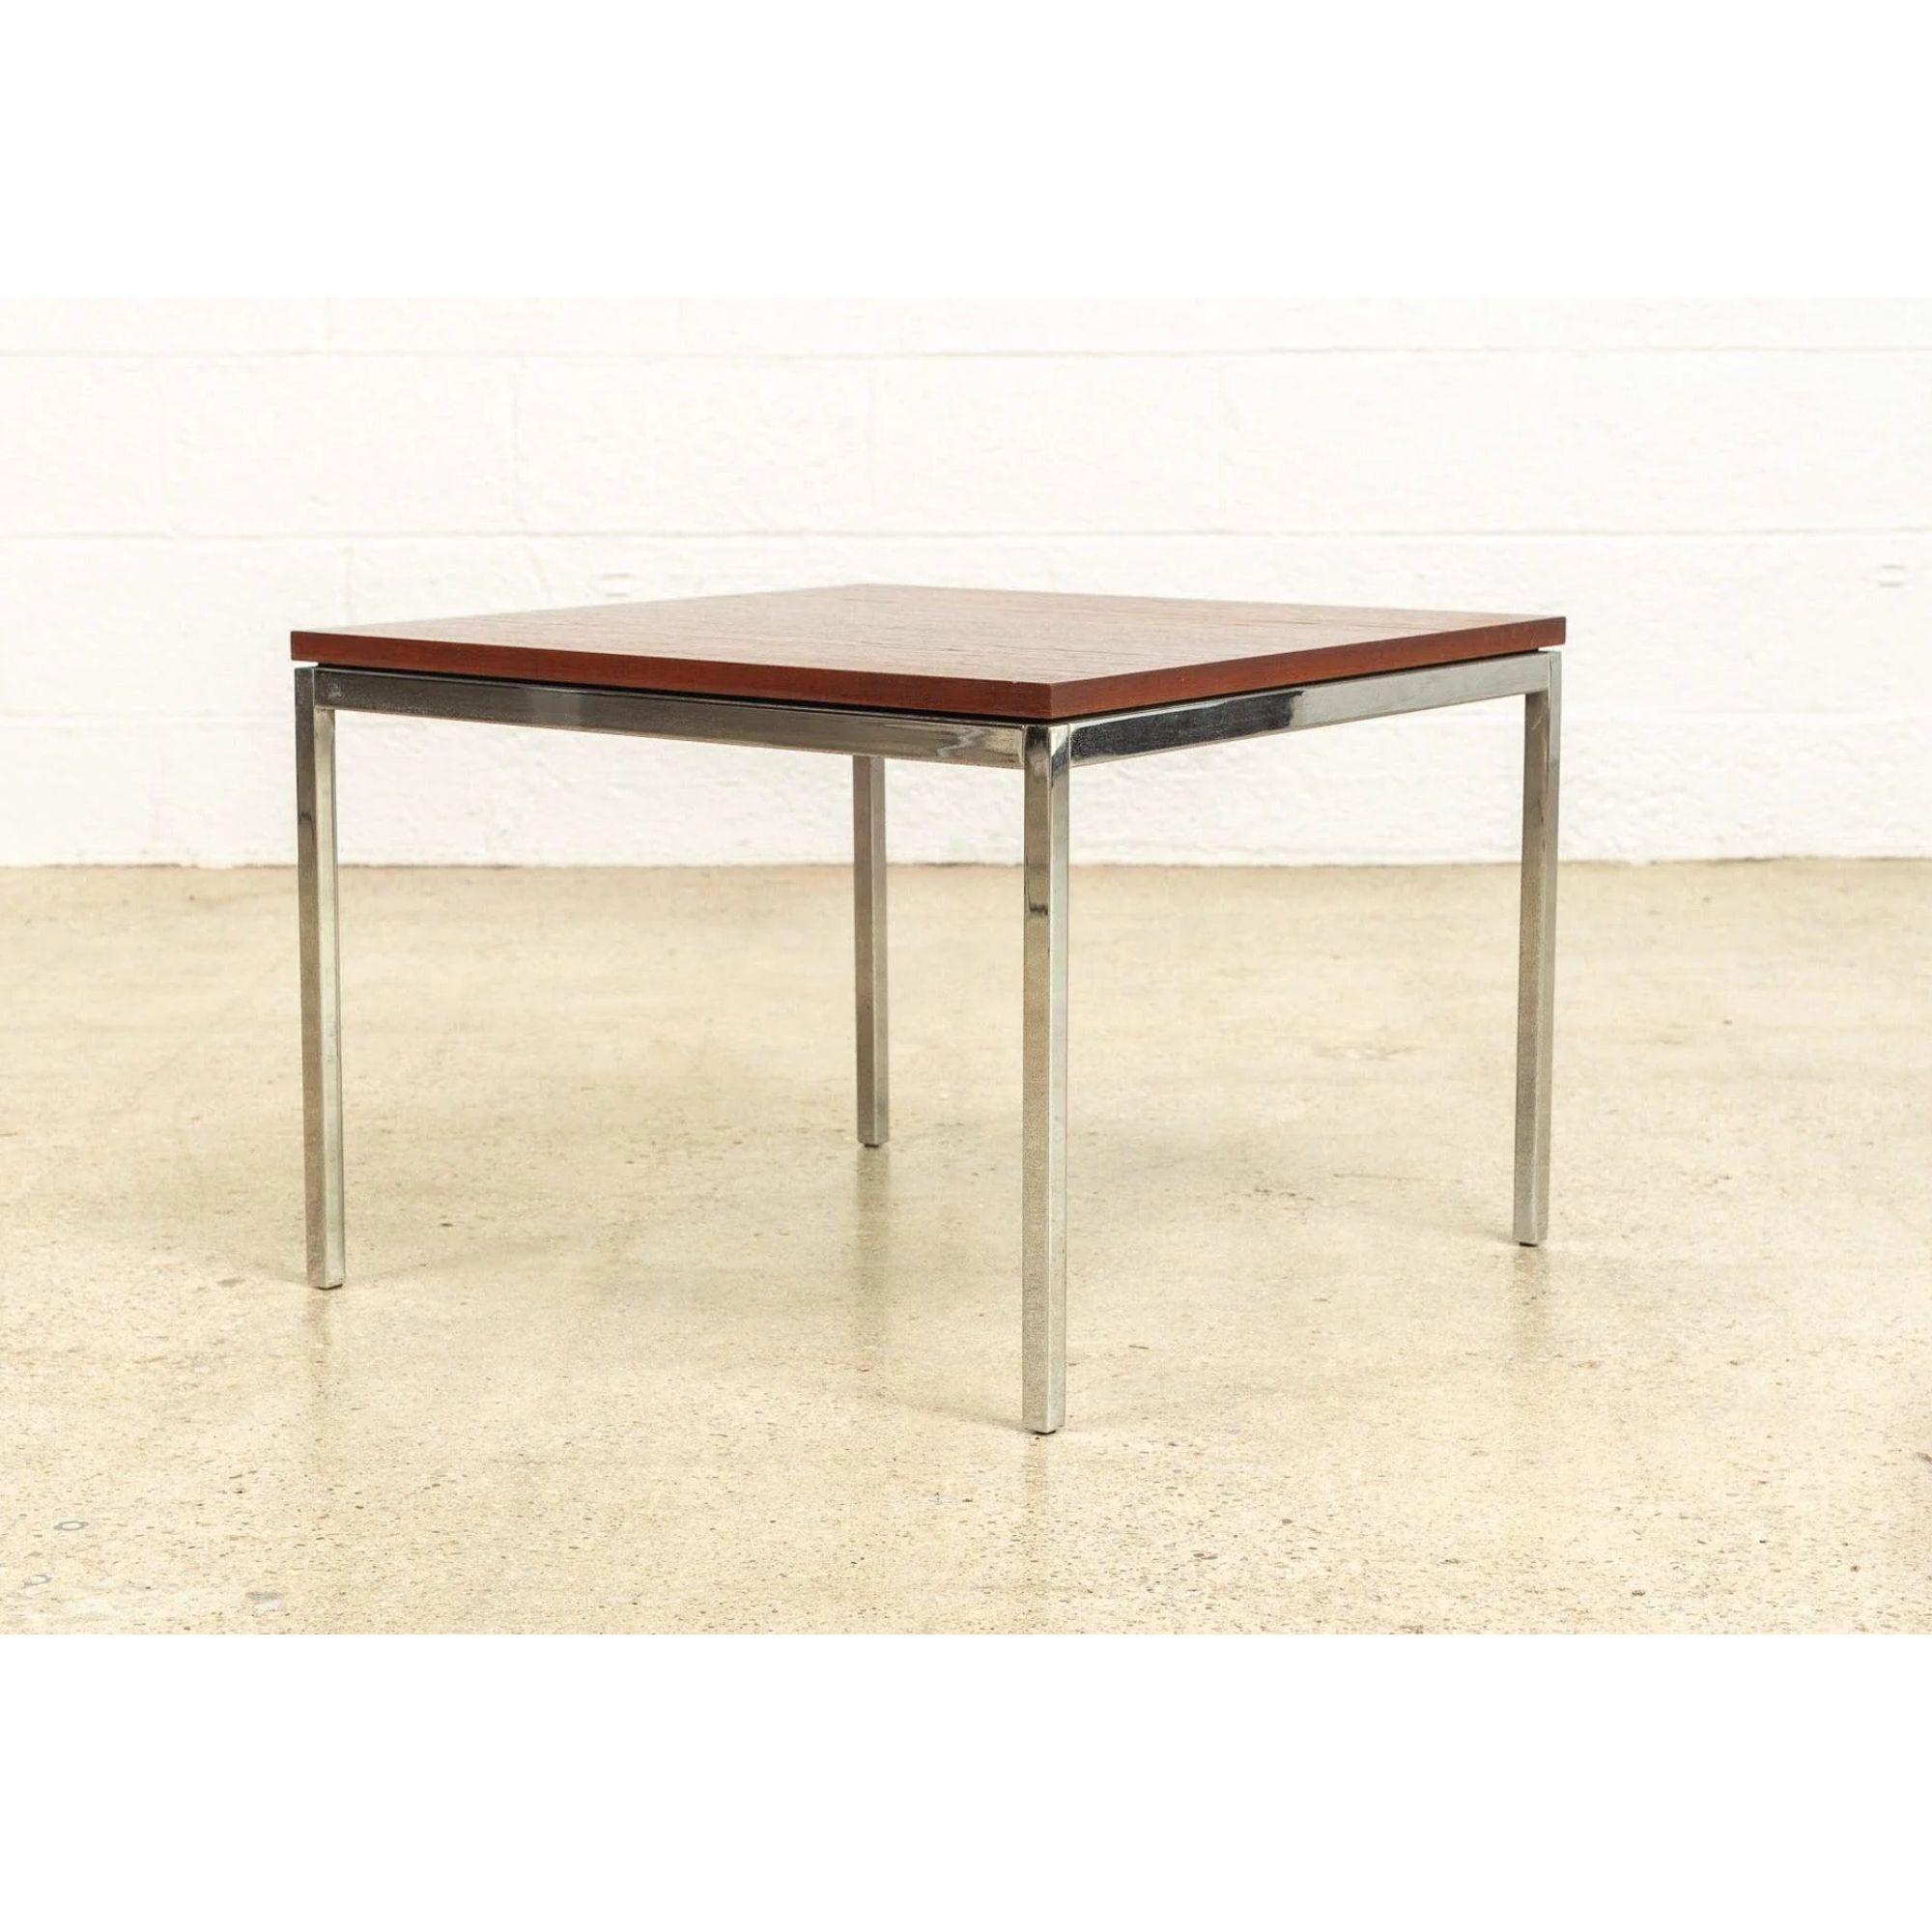 This vintage Mid-Century Modern Florence Knoll for Knoll Associates, Inc. square wood coffee table is circa 1960 and features a walnut wood top on a steel frame. This iconic table is a modern Classic and exemplifies the clean, Minimalist design of